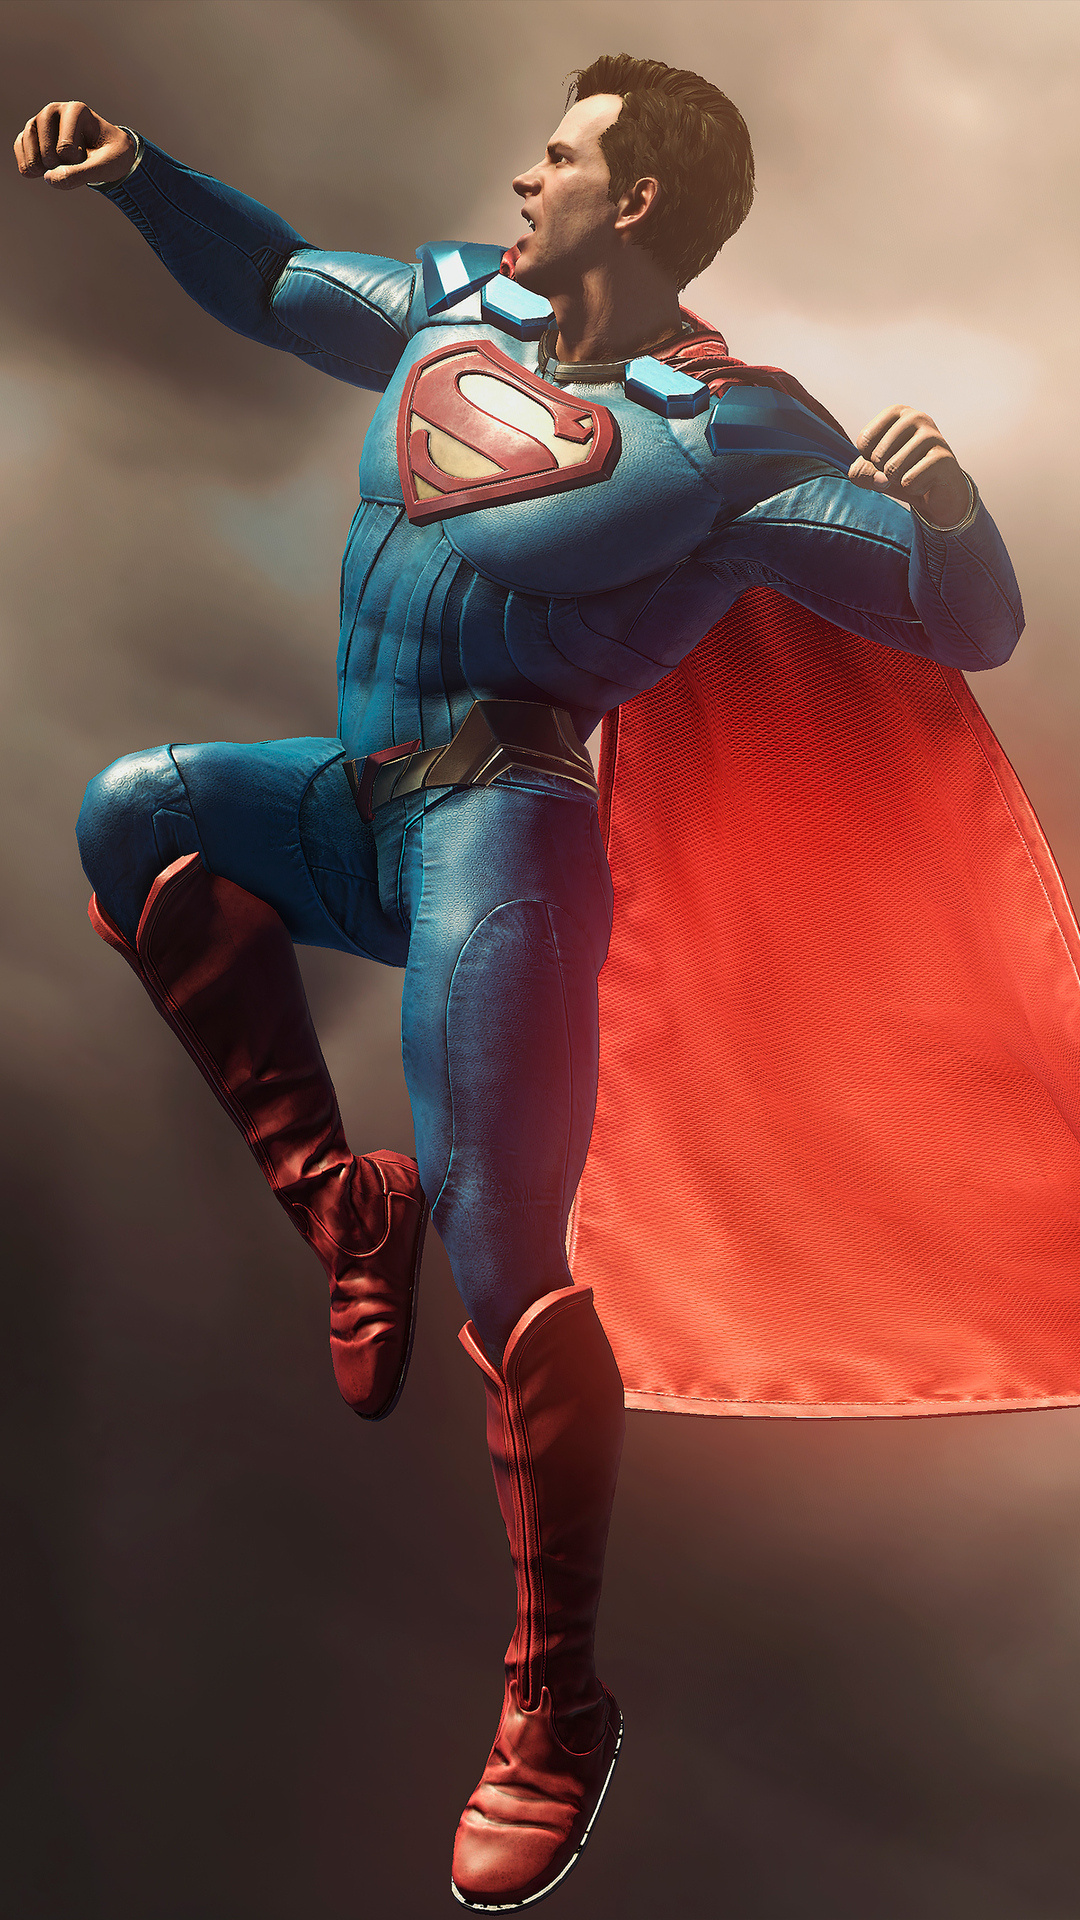 Injustice 2, Superman's game, Game wallpapers, Powerful heroes, 1080x1920 Full HD Phone